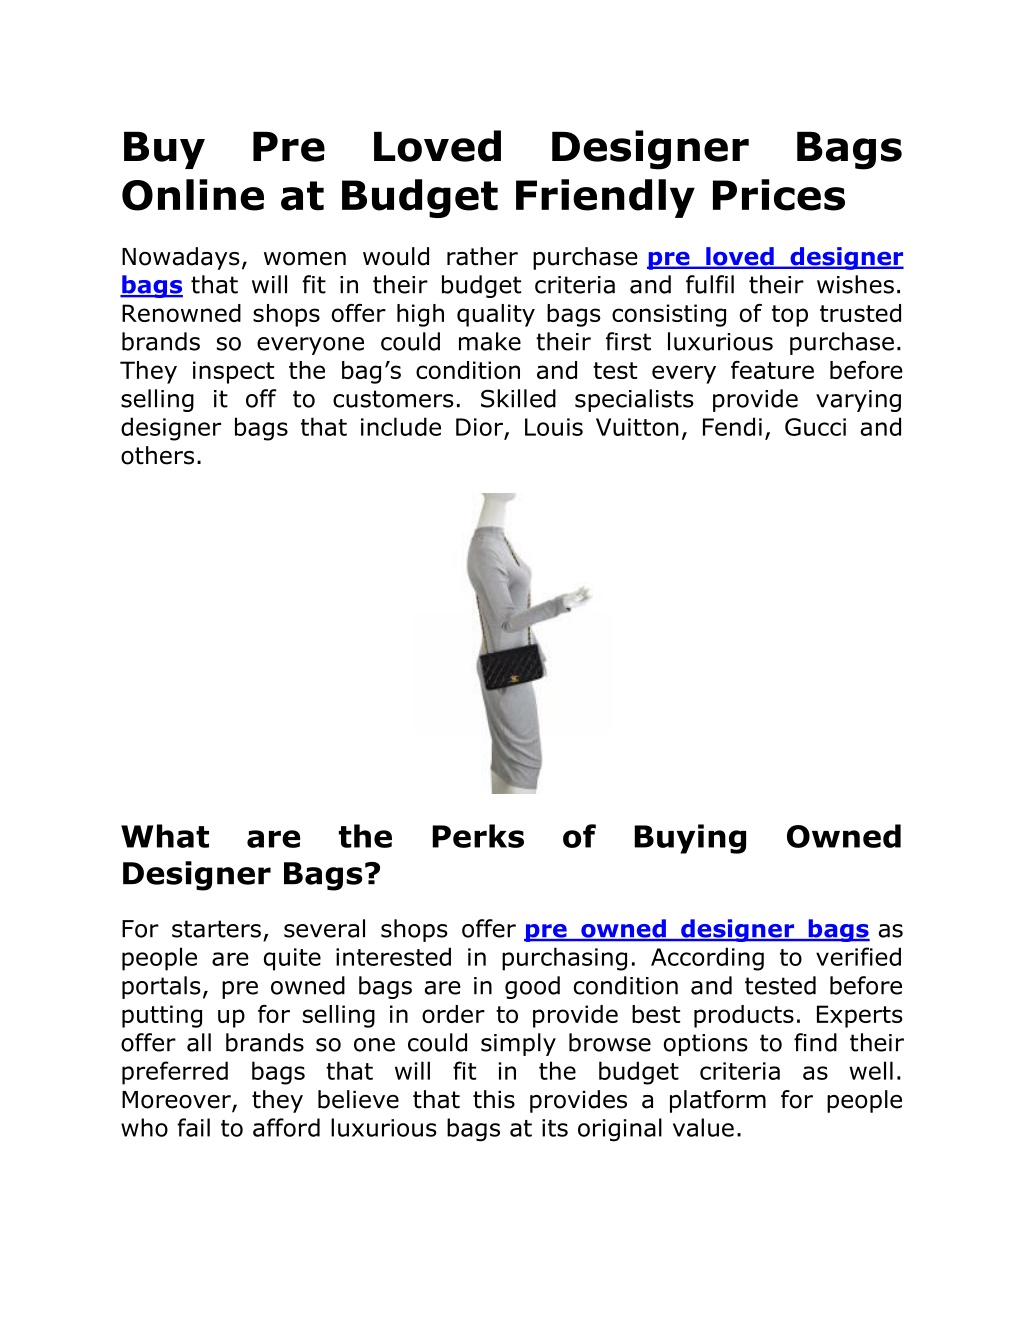 PPT - Buy Pre Loved Designer Bags Online at Budget Friendly Prices ...